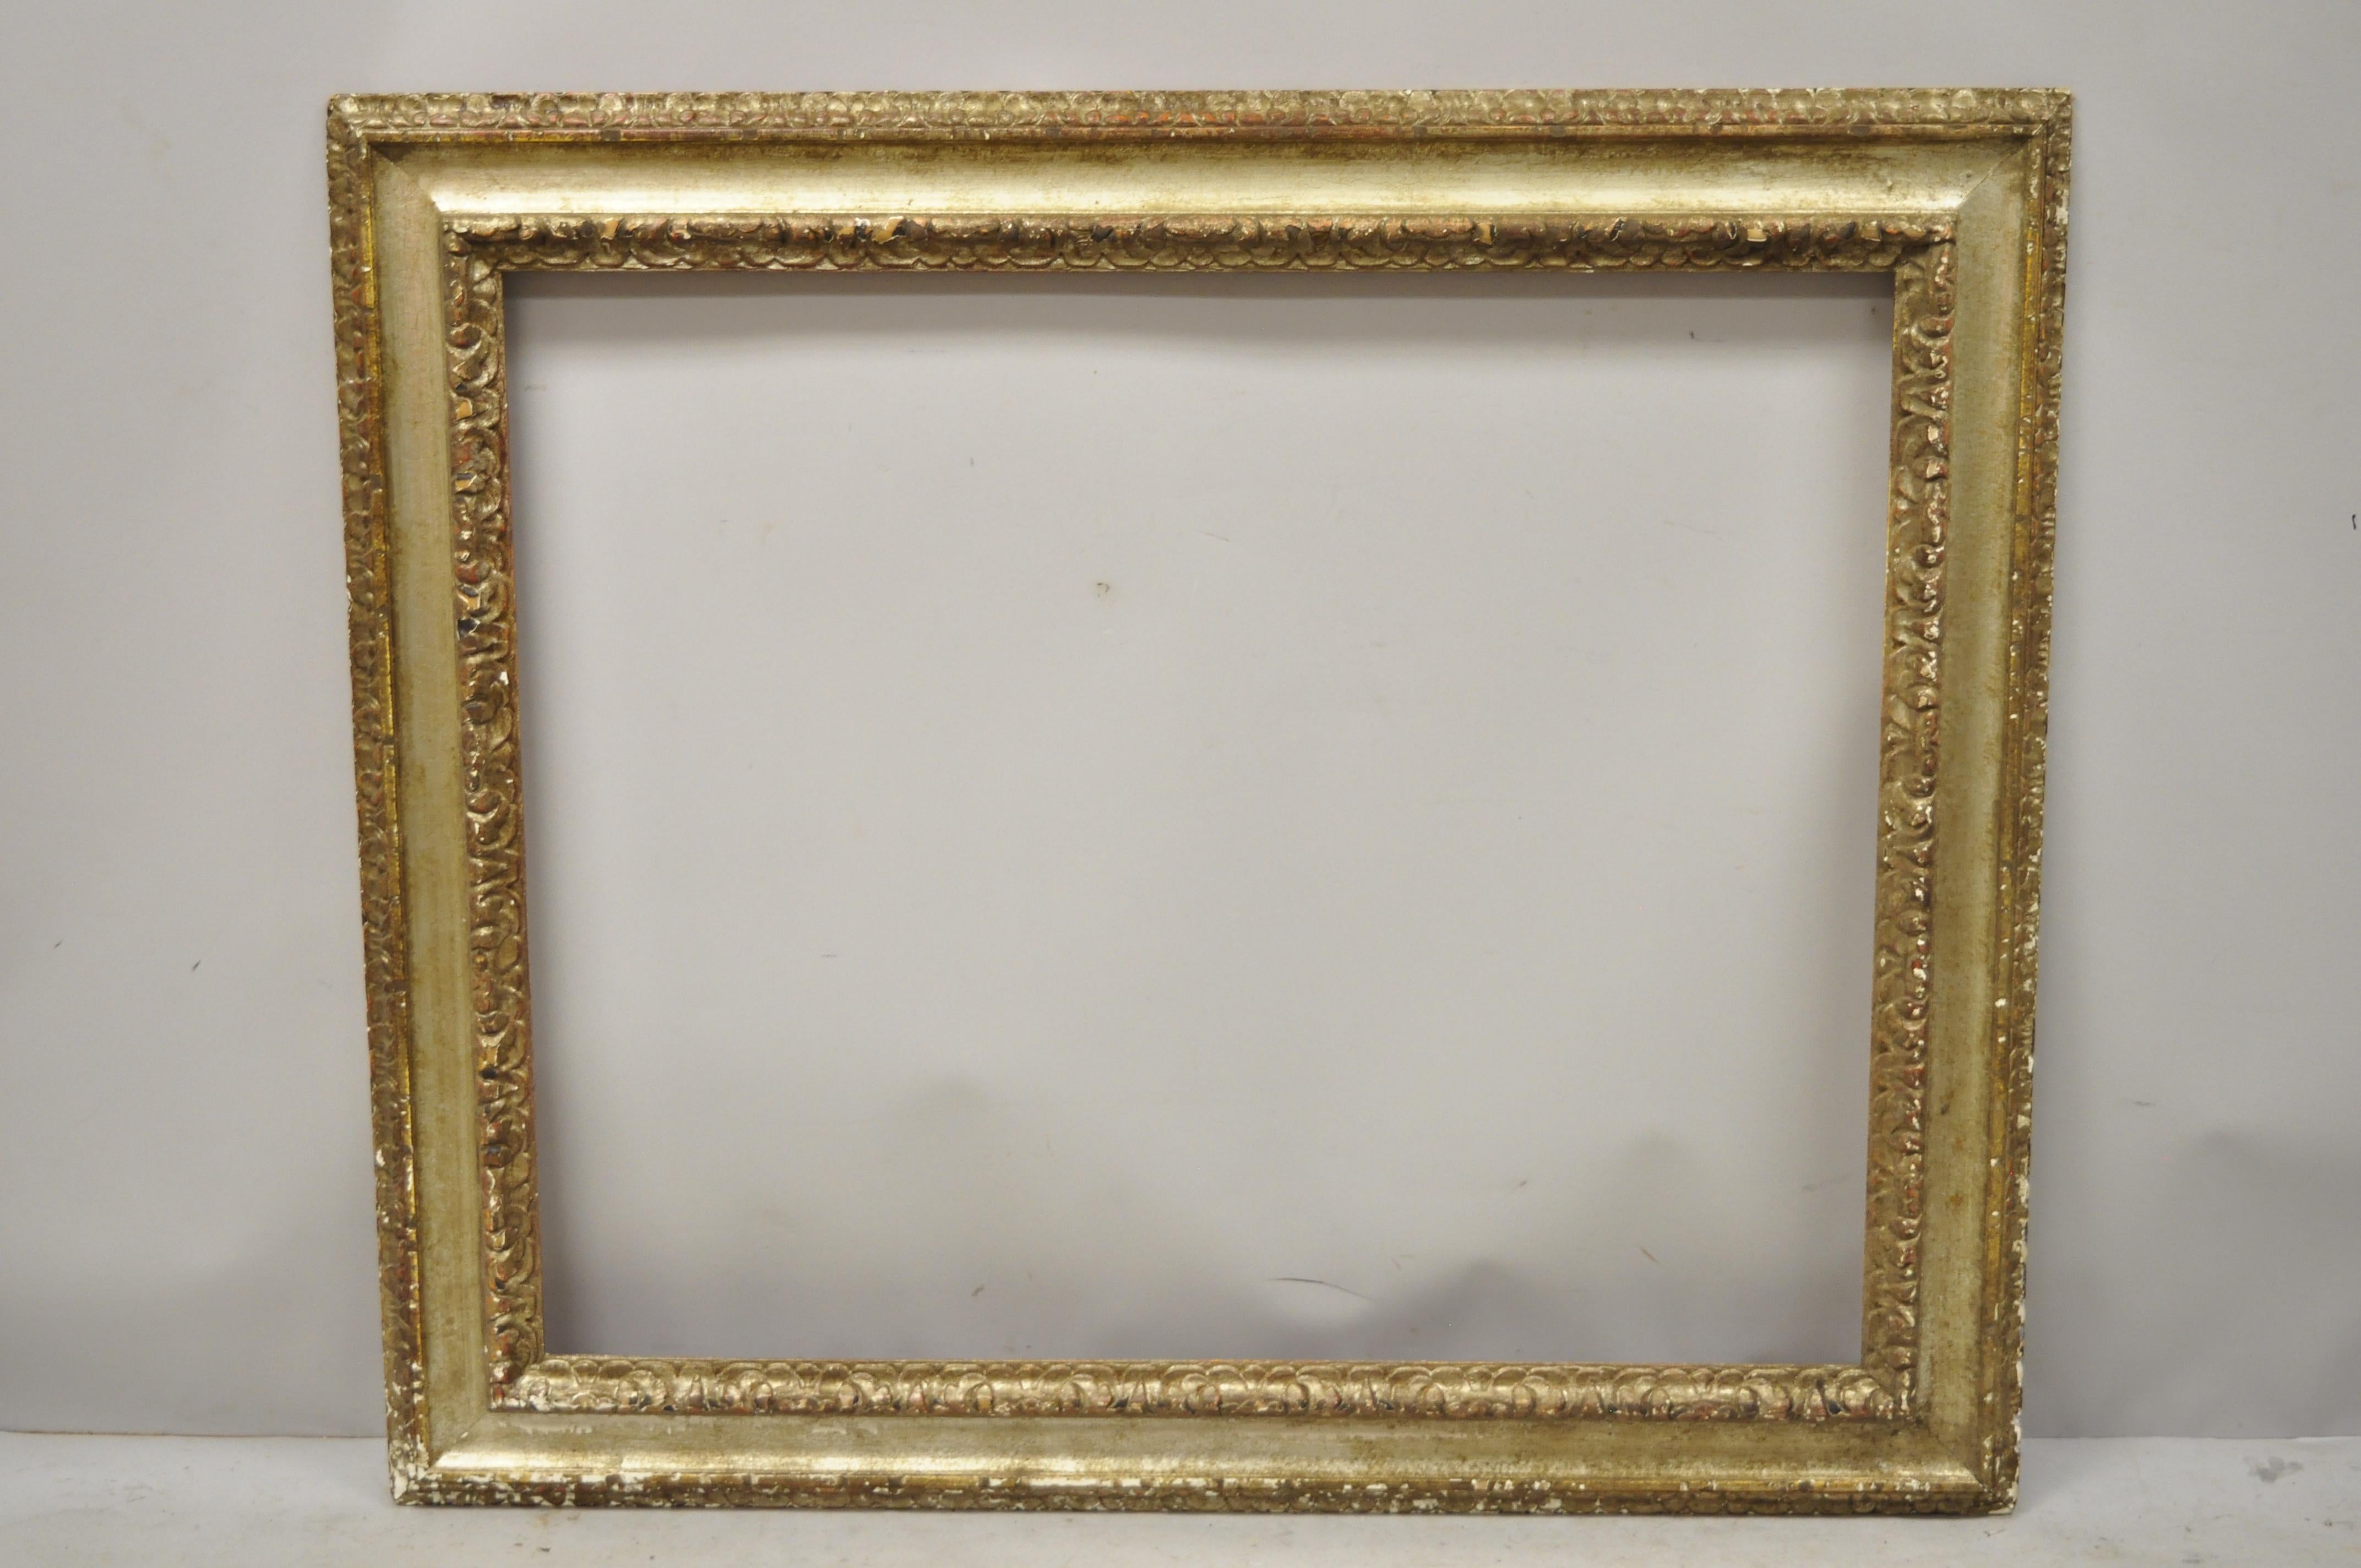 Italian Polychrome Parcel Gilt Carved Wood Florentine Painting Frame In Good Condition For Sale In Philadelphia, PA